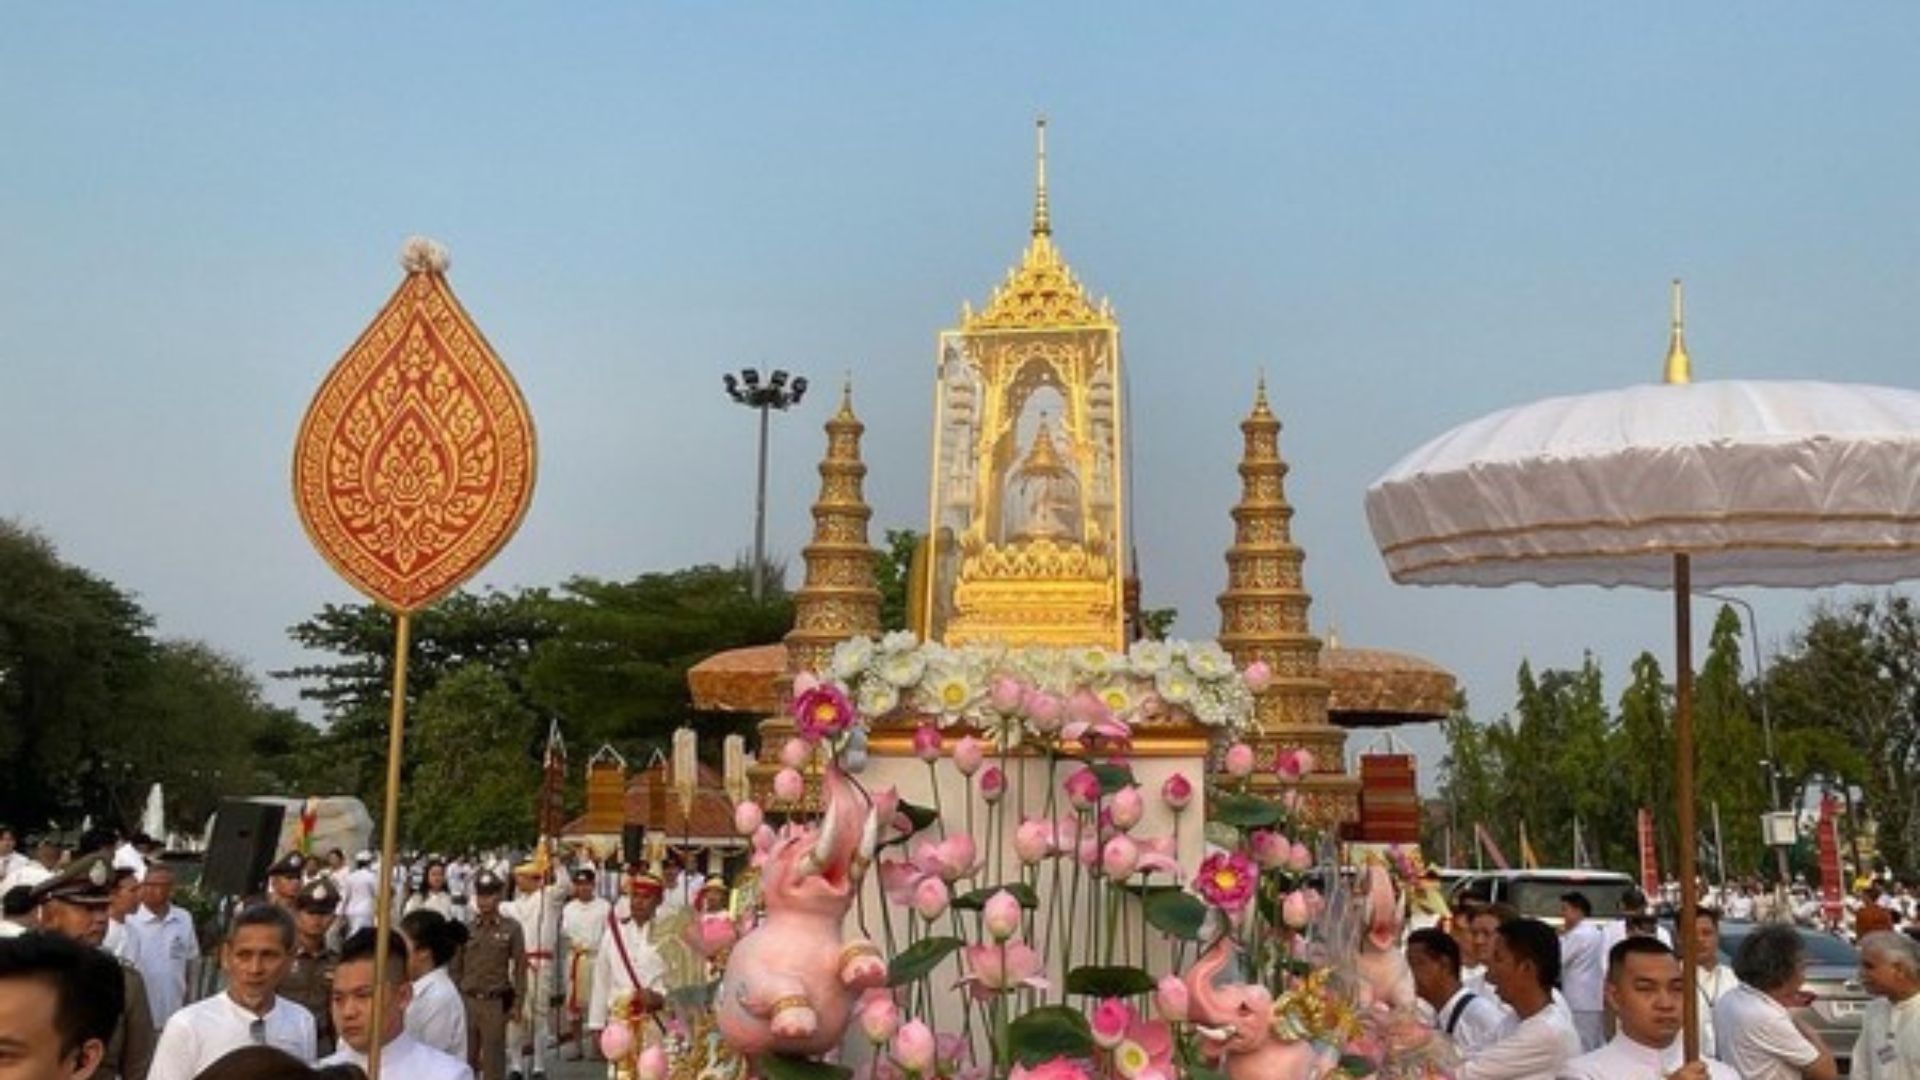 Thailand: Thousands Pay Respects To Lord Buddha’s Relics in Ubon Ratchathani